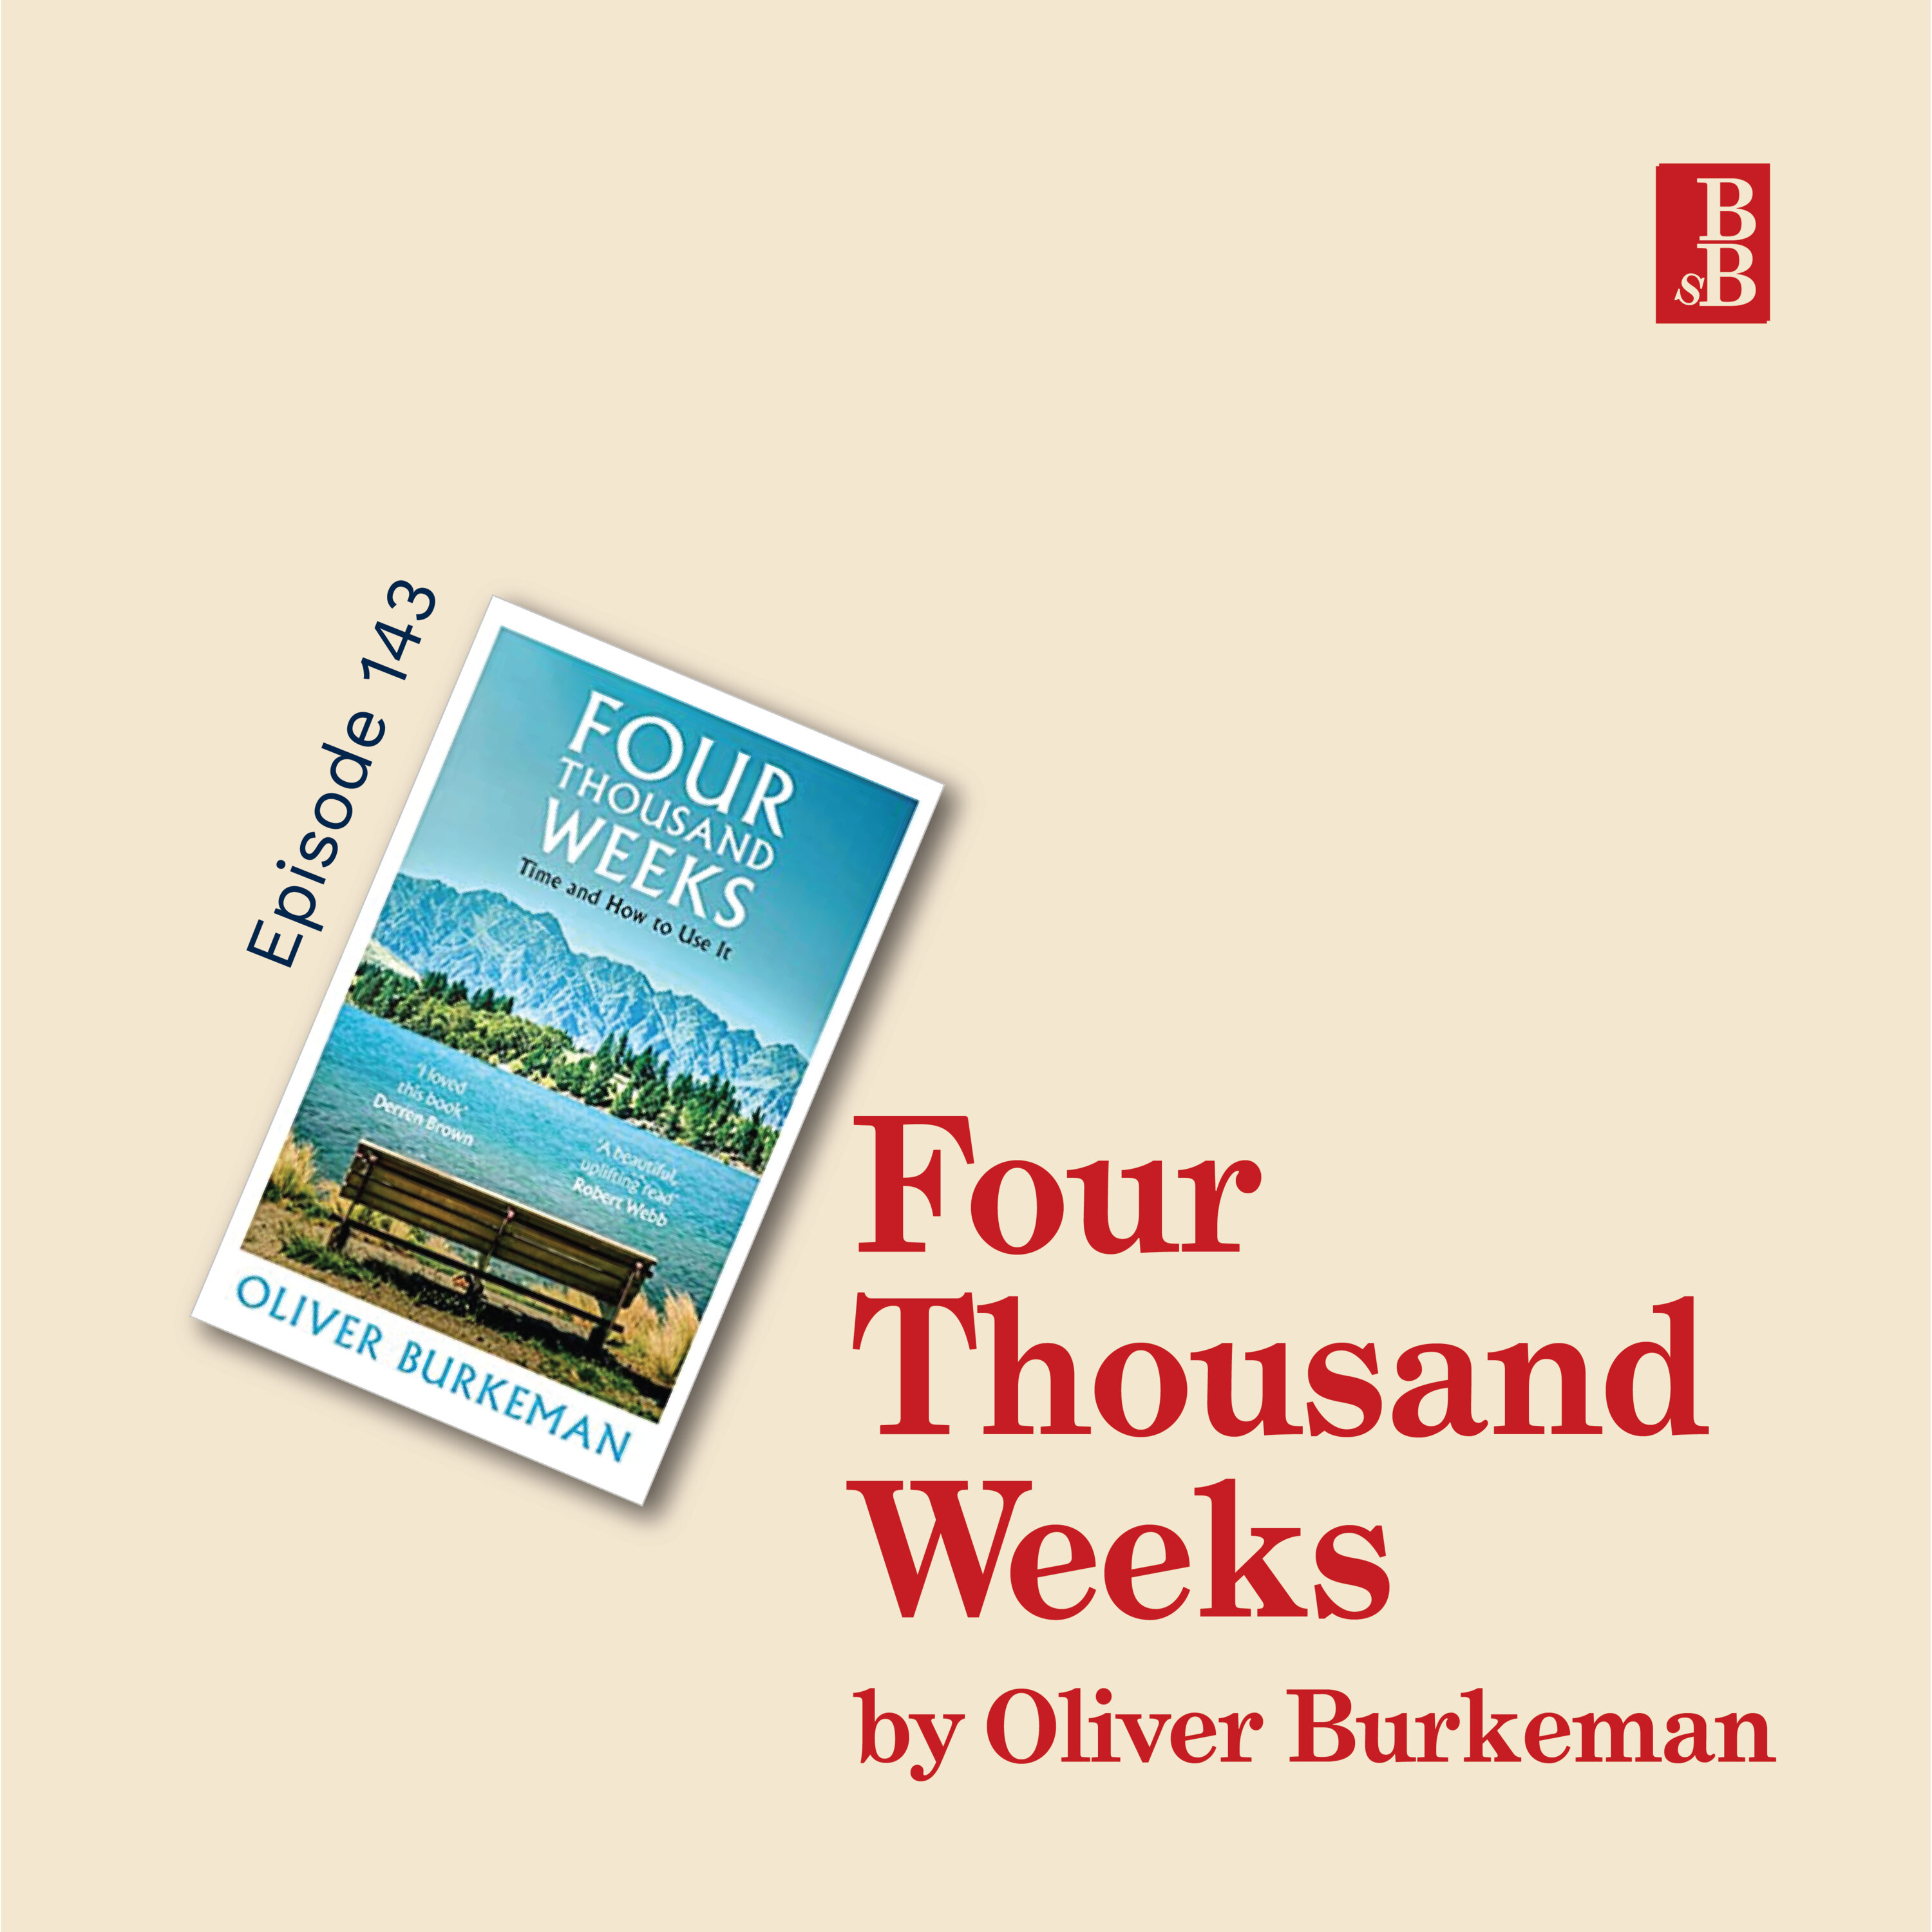 Four Thousand Weeks by Oliver Burkeman: how to make the most of your limited time on earth Image